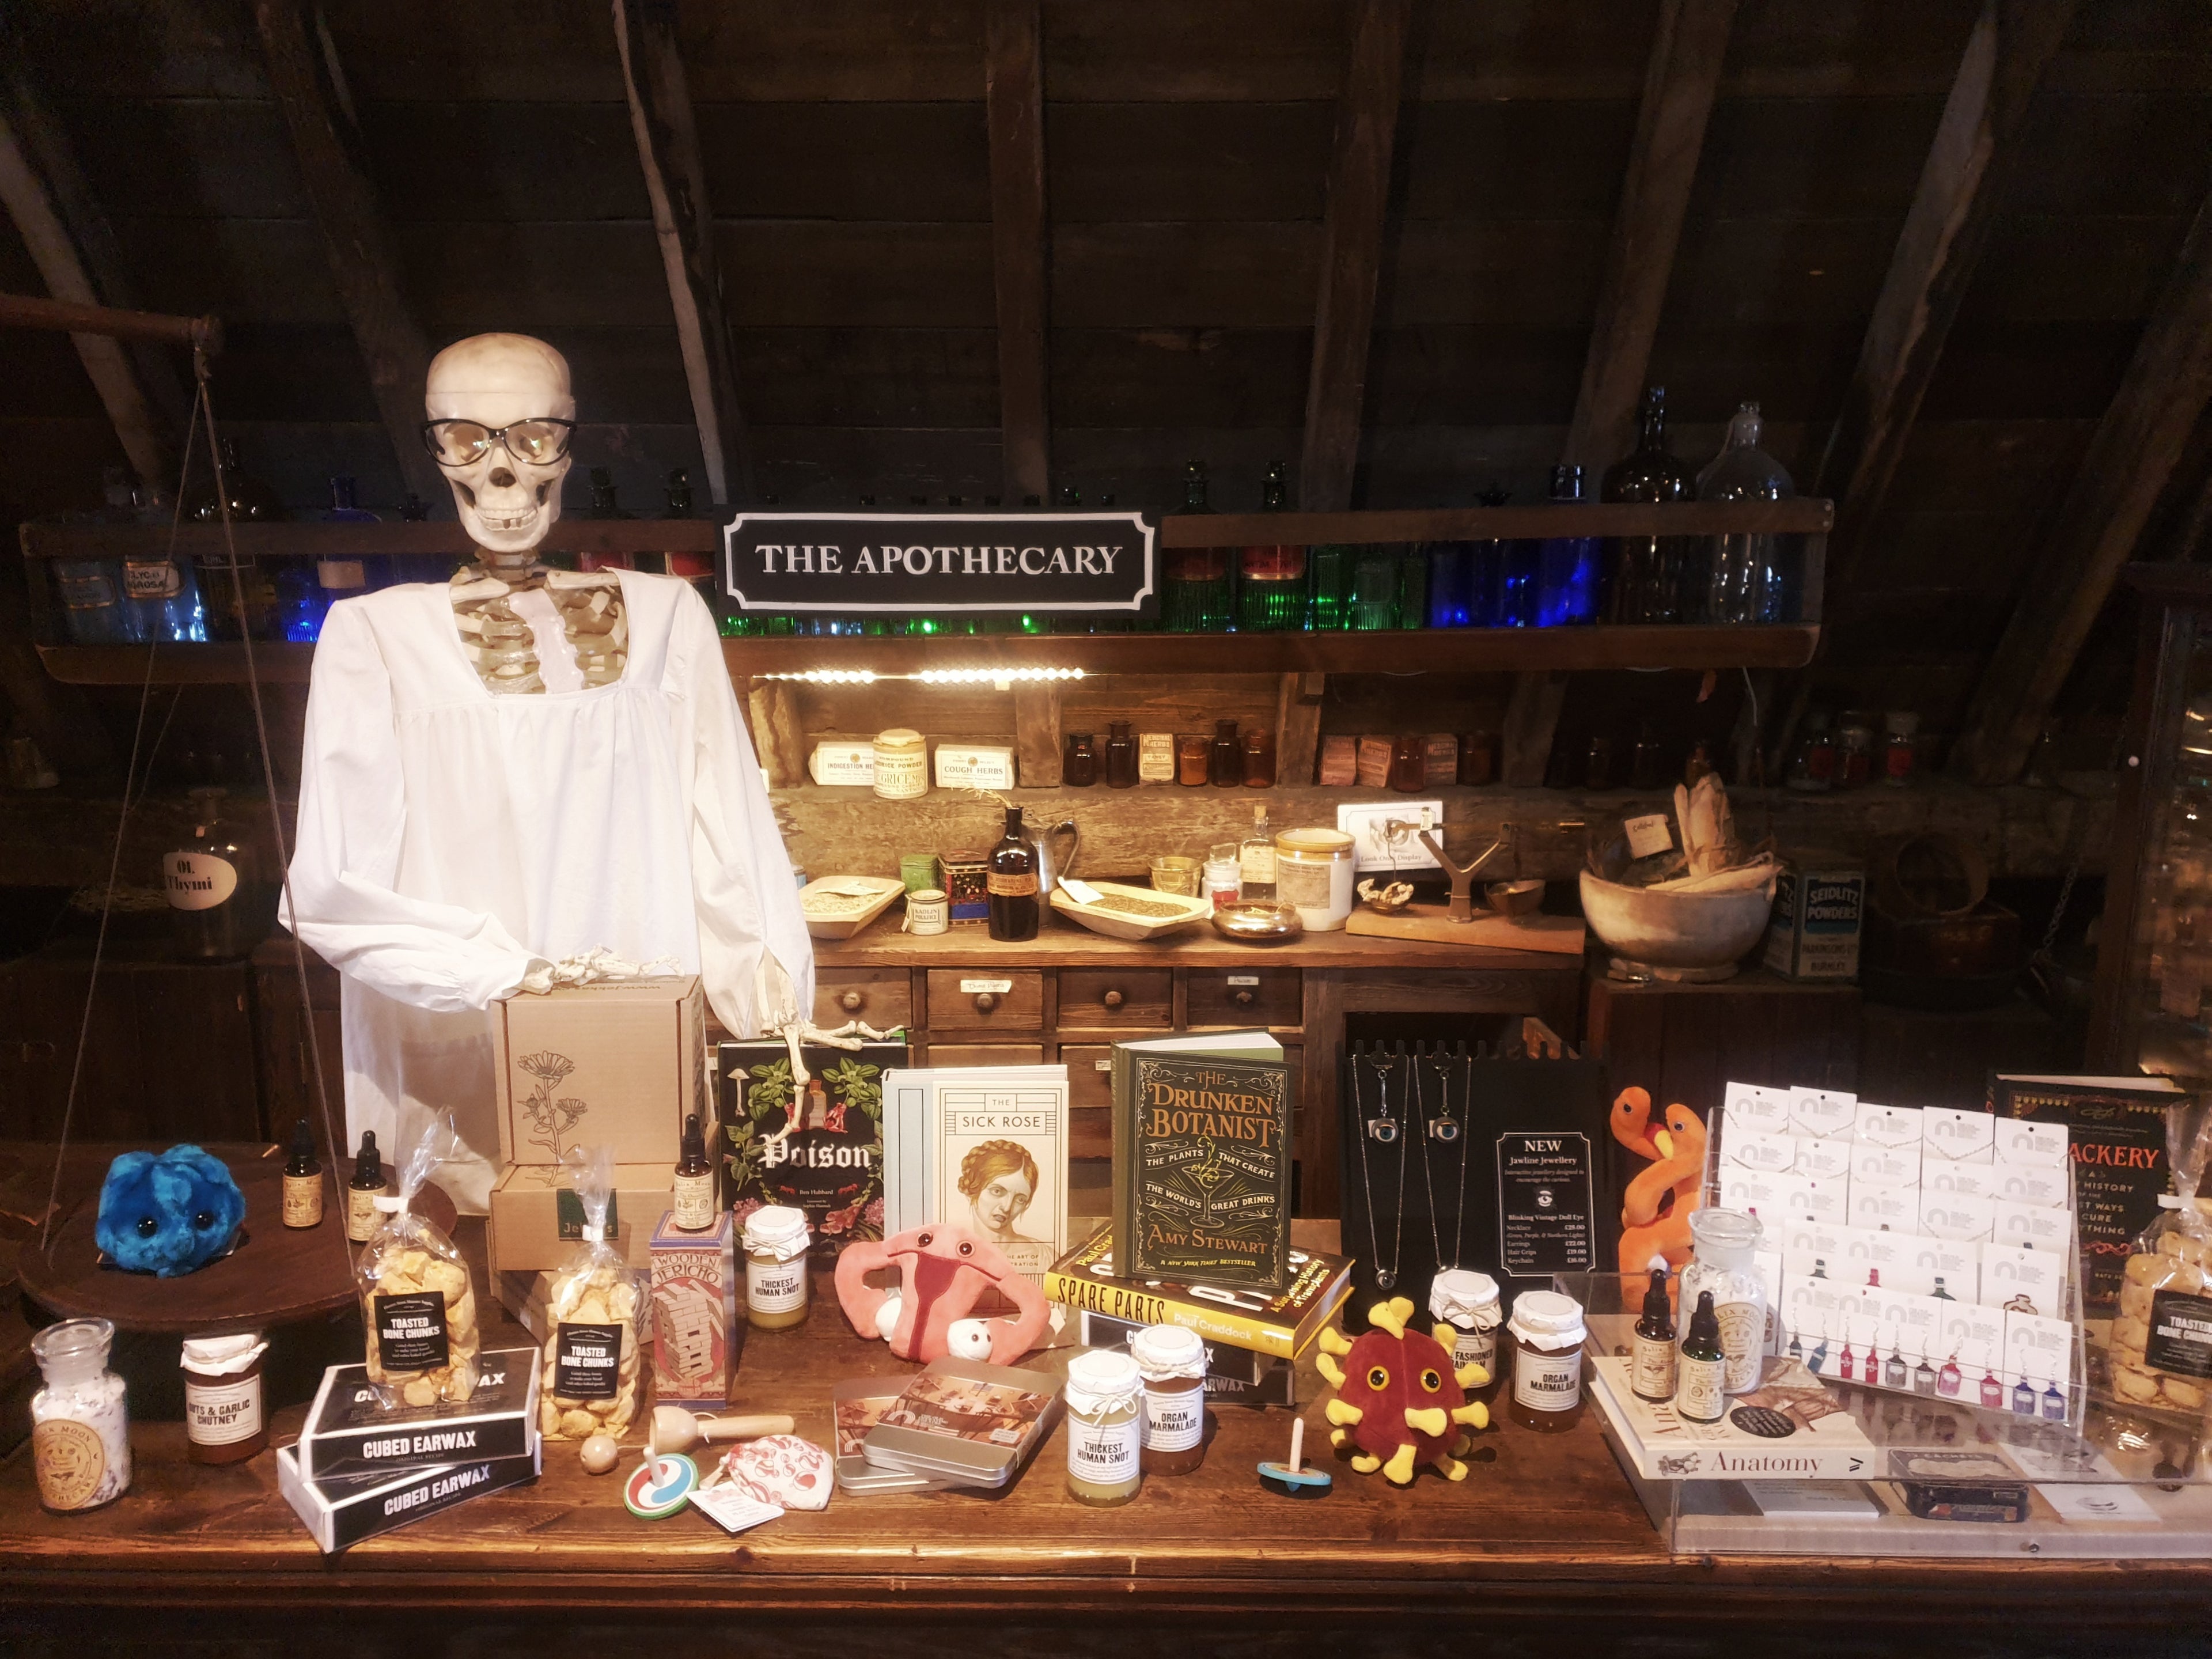 A skeleton wearing glasses and a white gown behind the apothecary counter, on which is a splendid array of shop products, including books, jewellery, plush toys, jam and toiletries